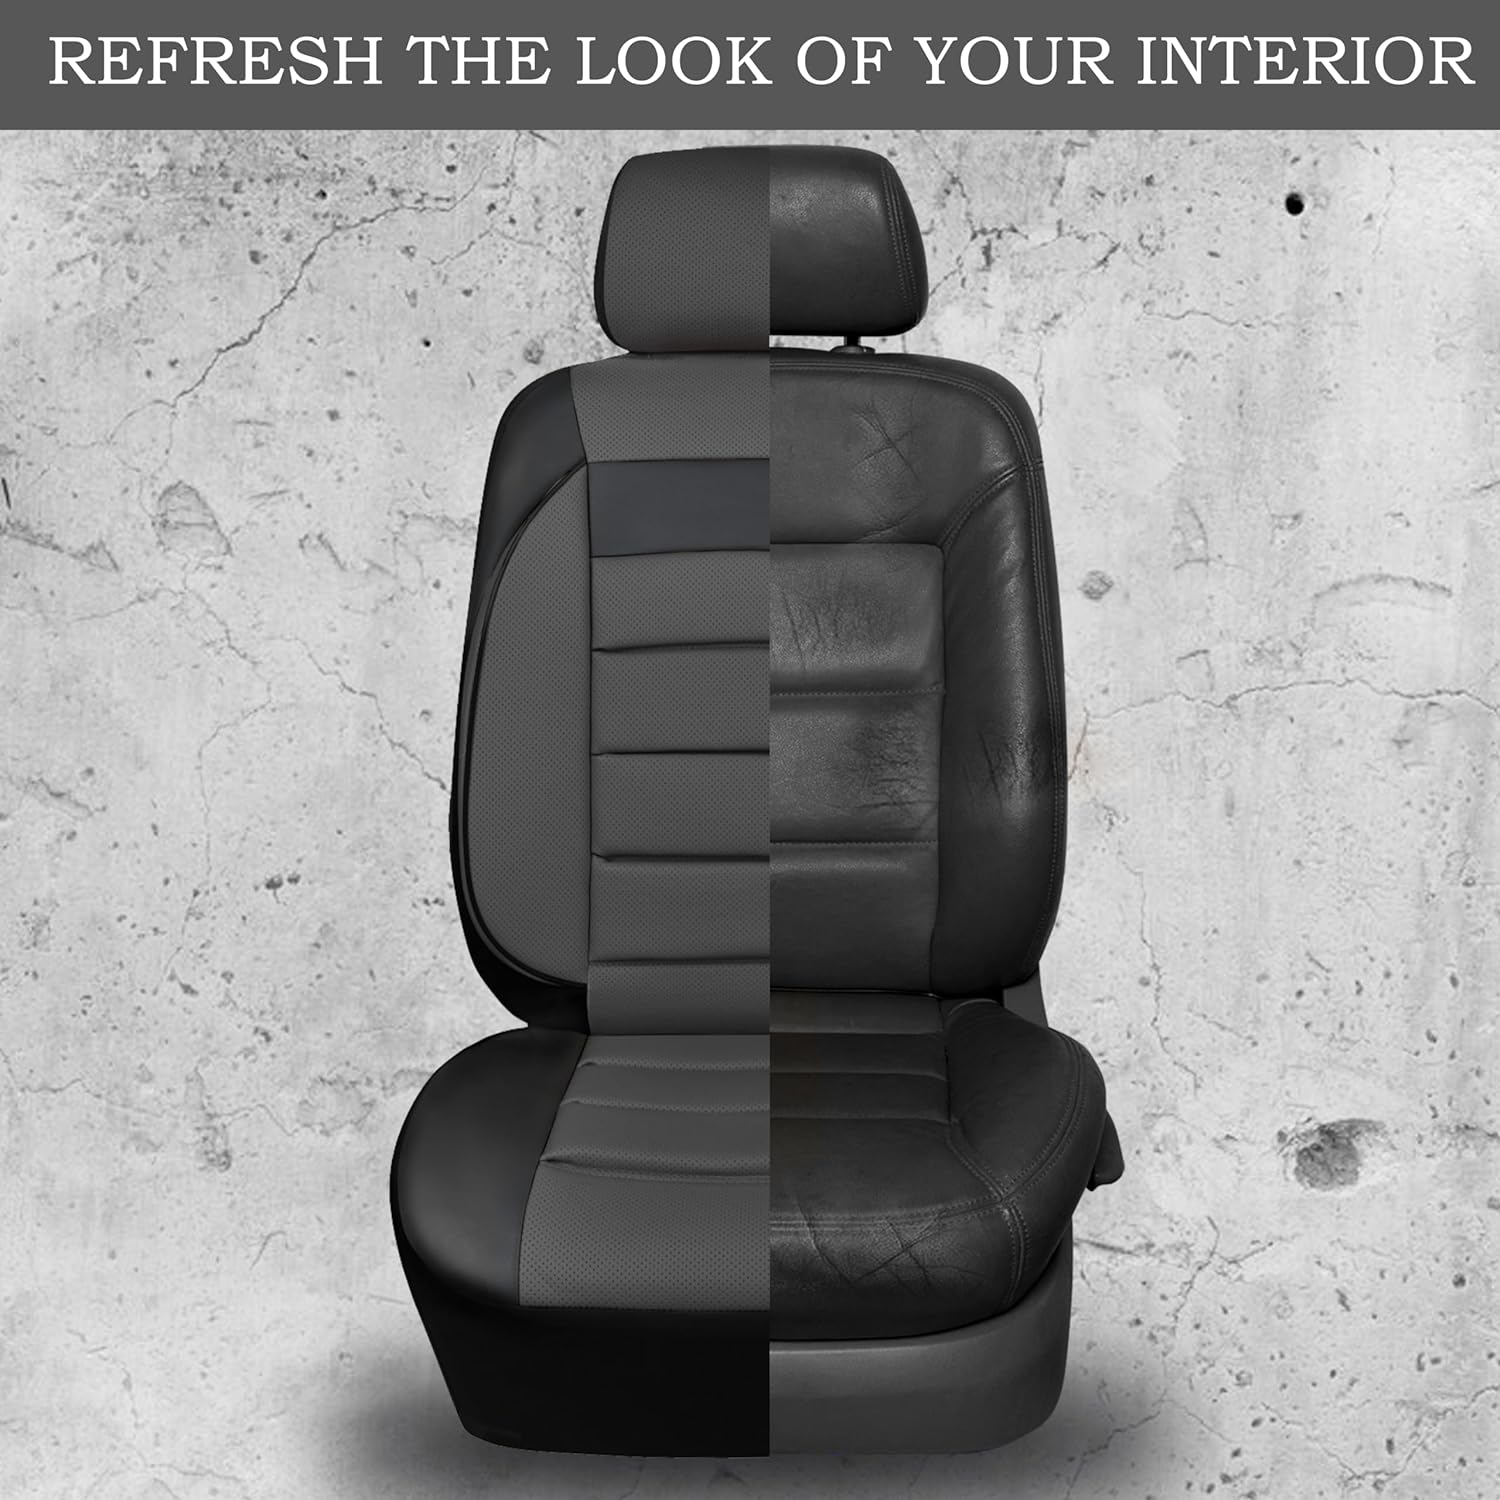 CAR PASS Leather Car Seat Covers Front Seats Only, Universal Fit Automotive Interior Waterproof 3D Foam Back Support Car Seat Covers for Trucks Vans and SUVs Airbag compatible 2 Pieces black gray grey